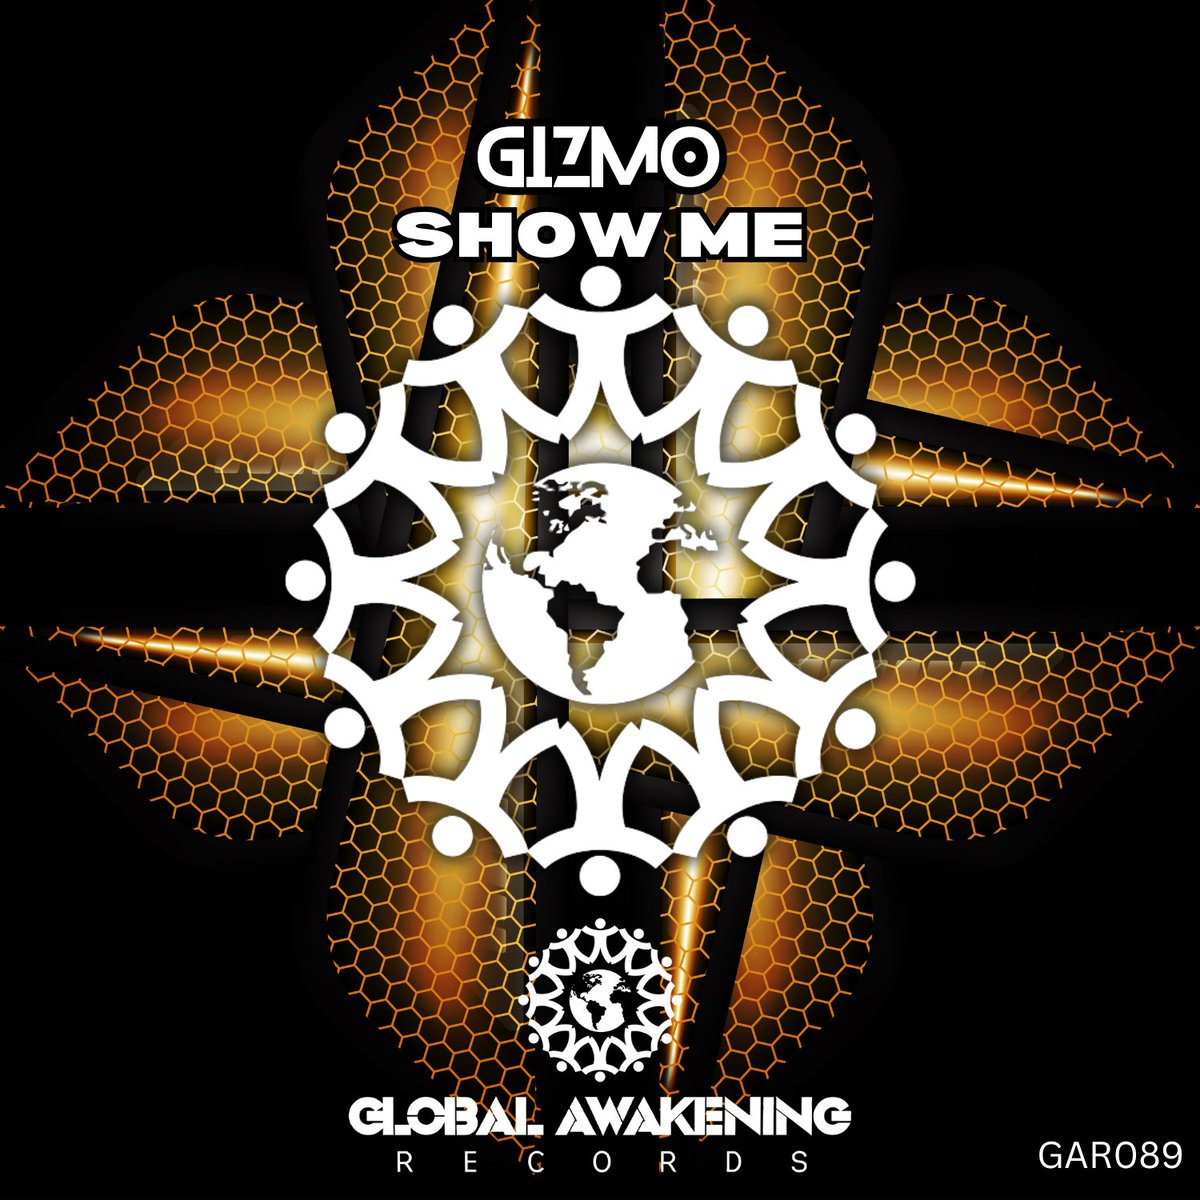 Global Awakening Records are back with a new release ' Show Me' from Gizmo.

Check it out along with the labels other releases here:
bit.ly/showmeglobalaw…

#hardhouse #harddance #toolboxdigital #newrelease #newmusic #globalawakeningrecords